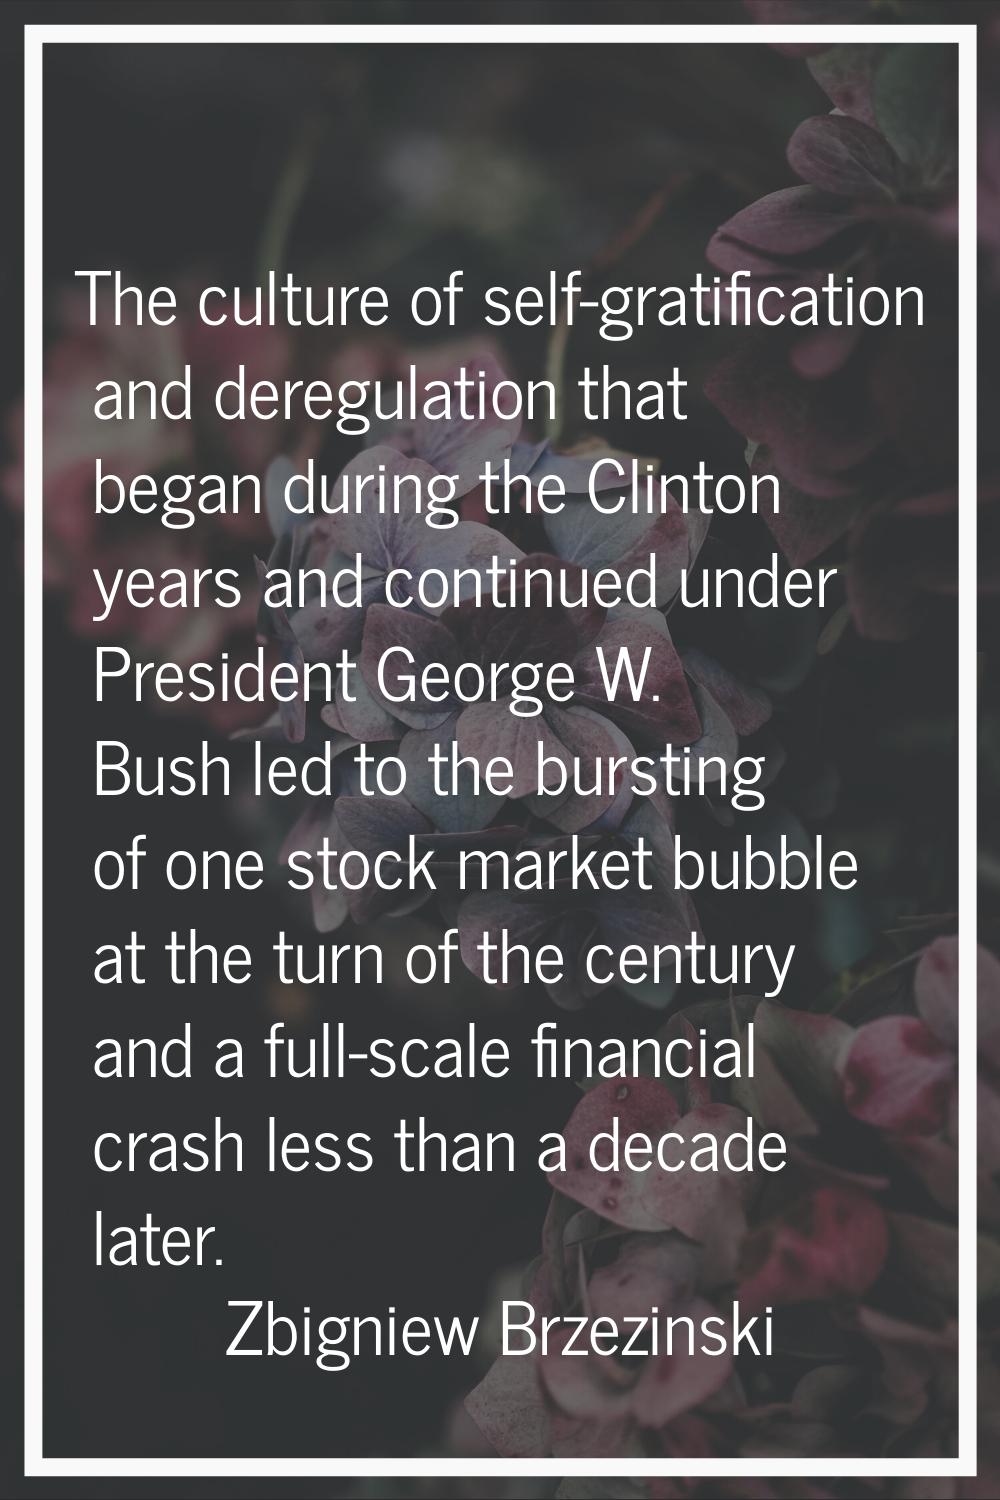 The culture of self-gratification and deregulation that began during the Clinton years and continue